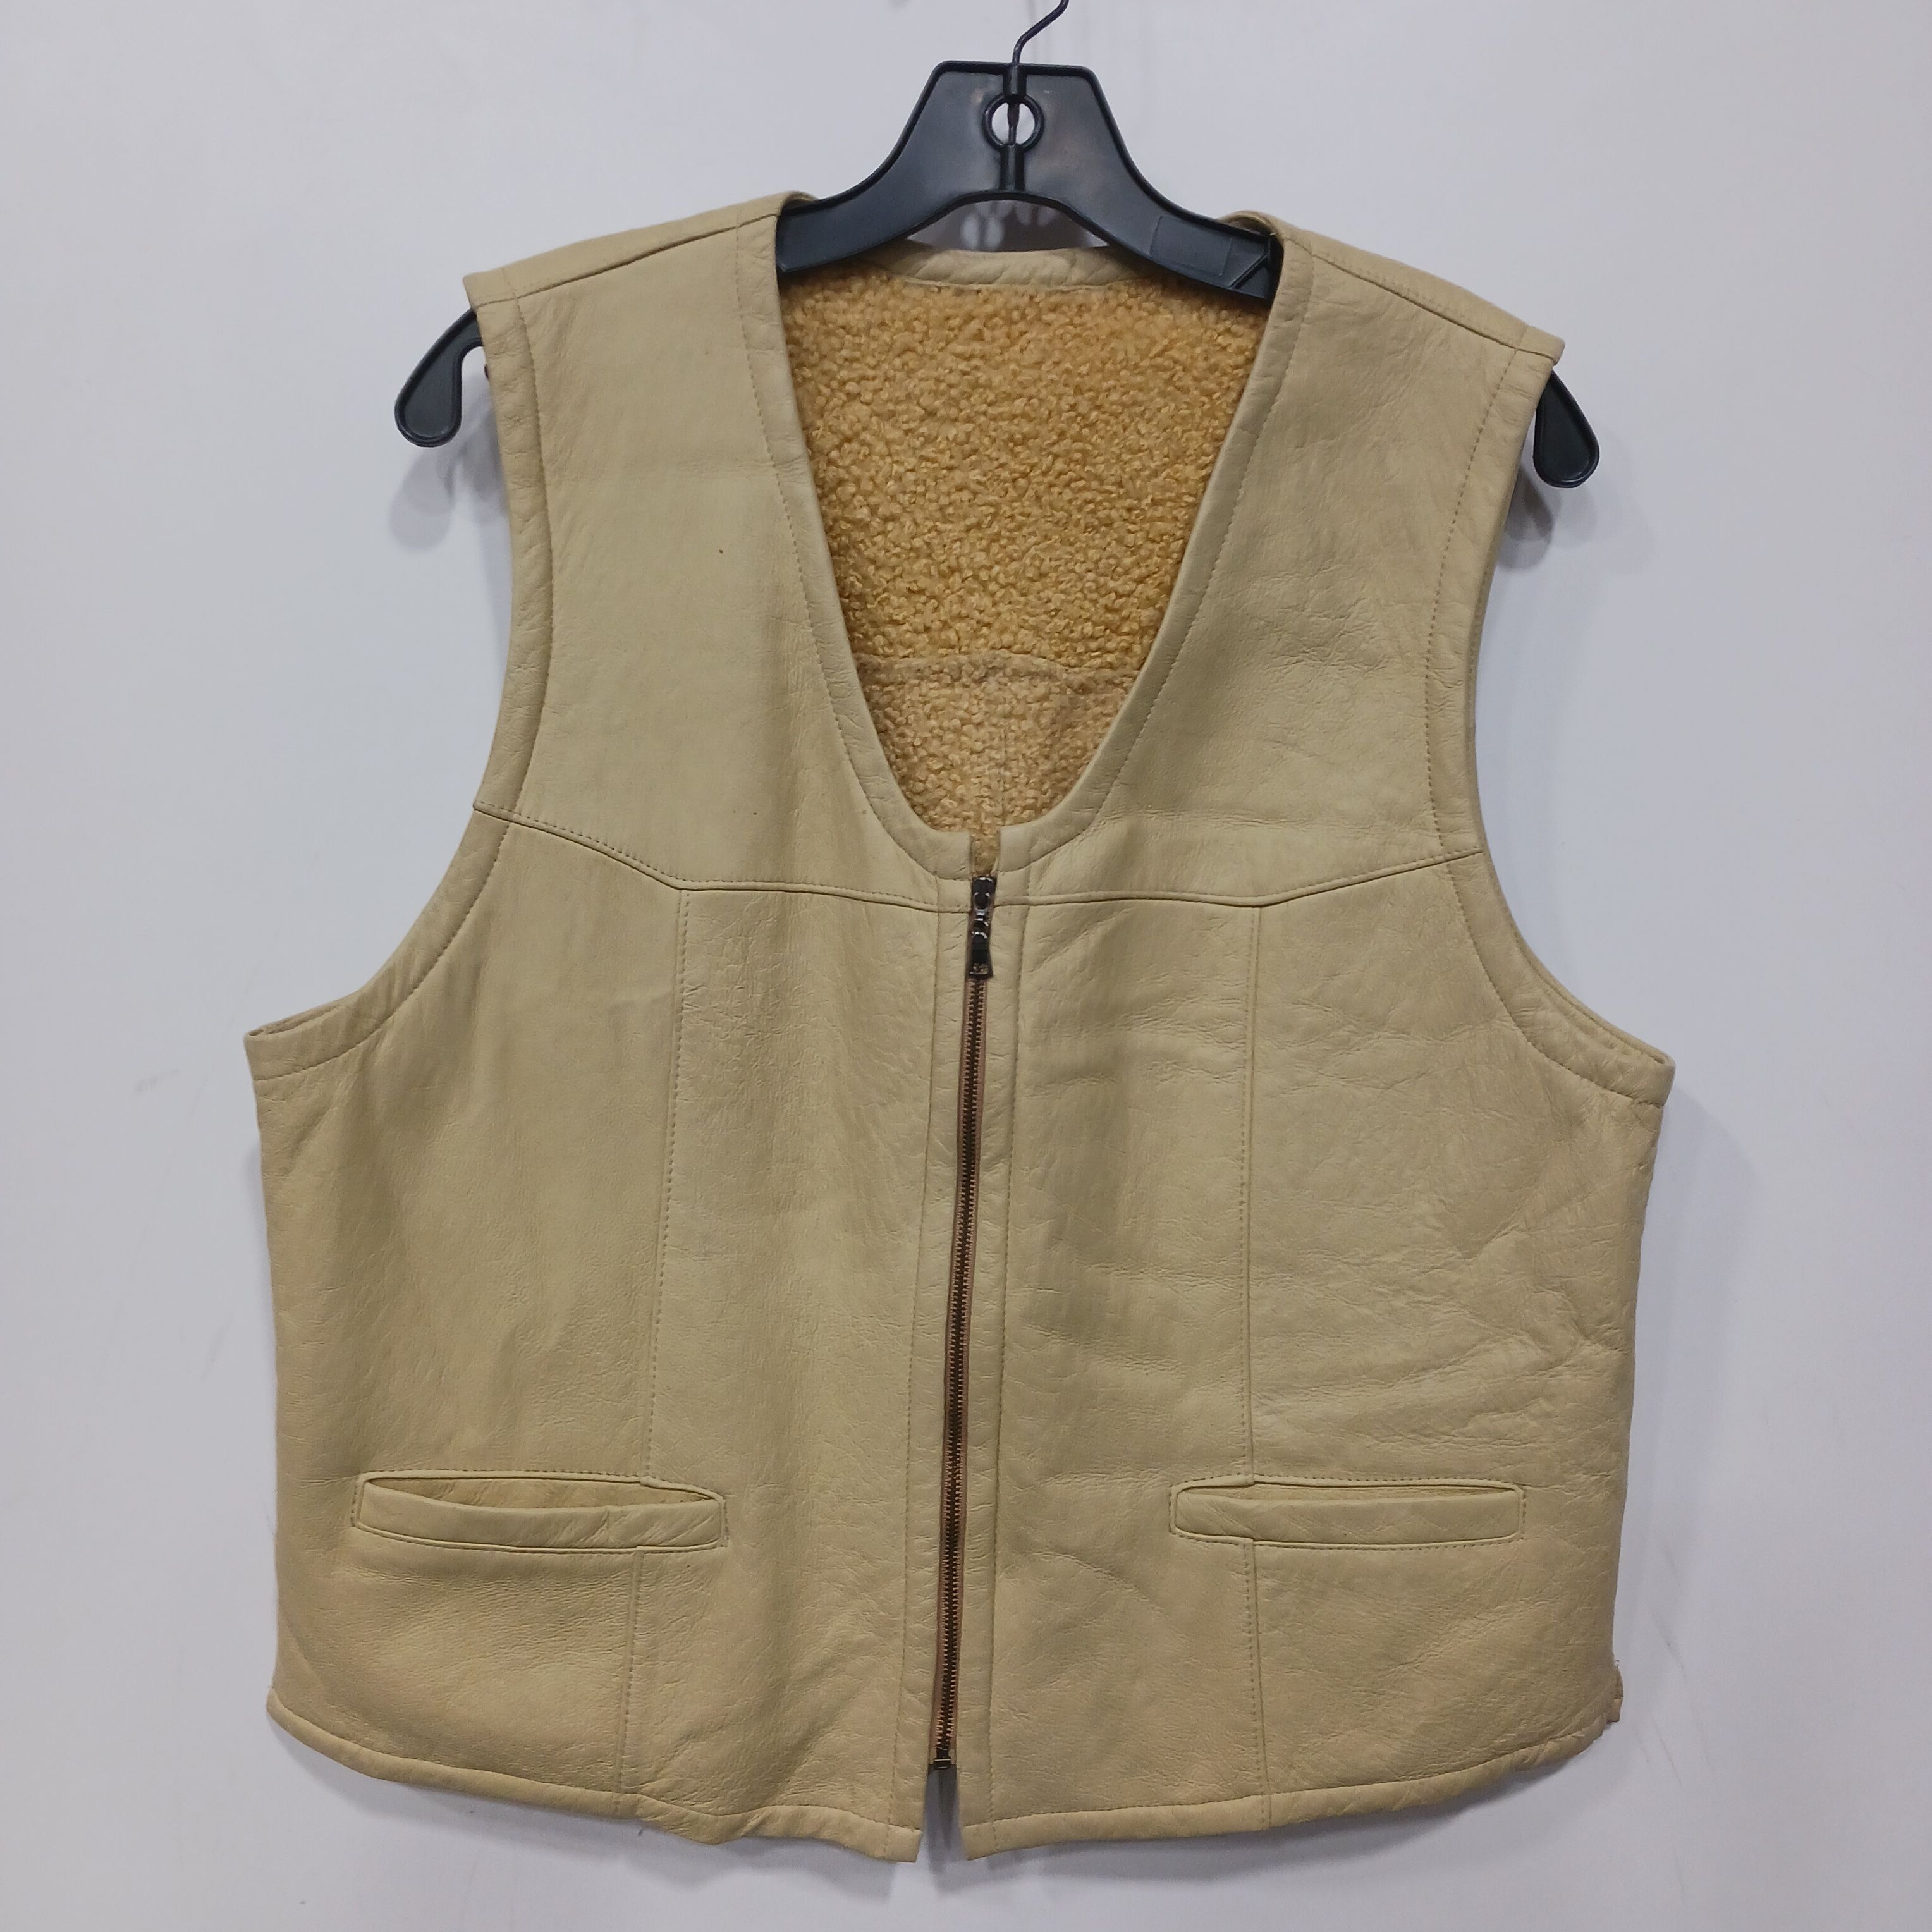 Buy Women’s Vintage Pellacci New Zealand Baby Lamb Leather Full-Zip Basic  Vest Sz L for USD 24.99 | GoodwillFinds